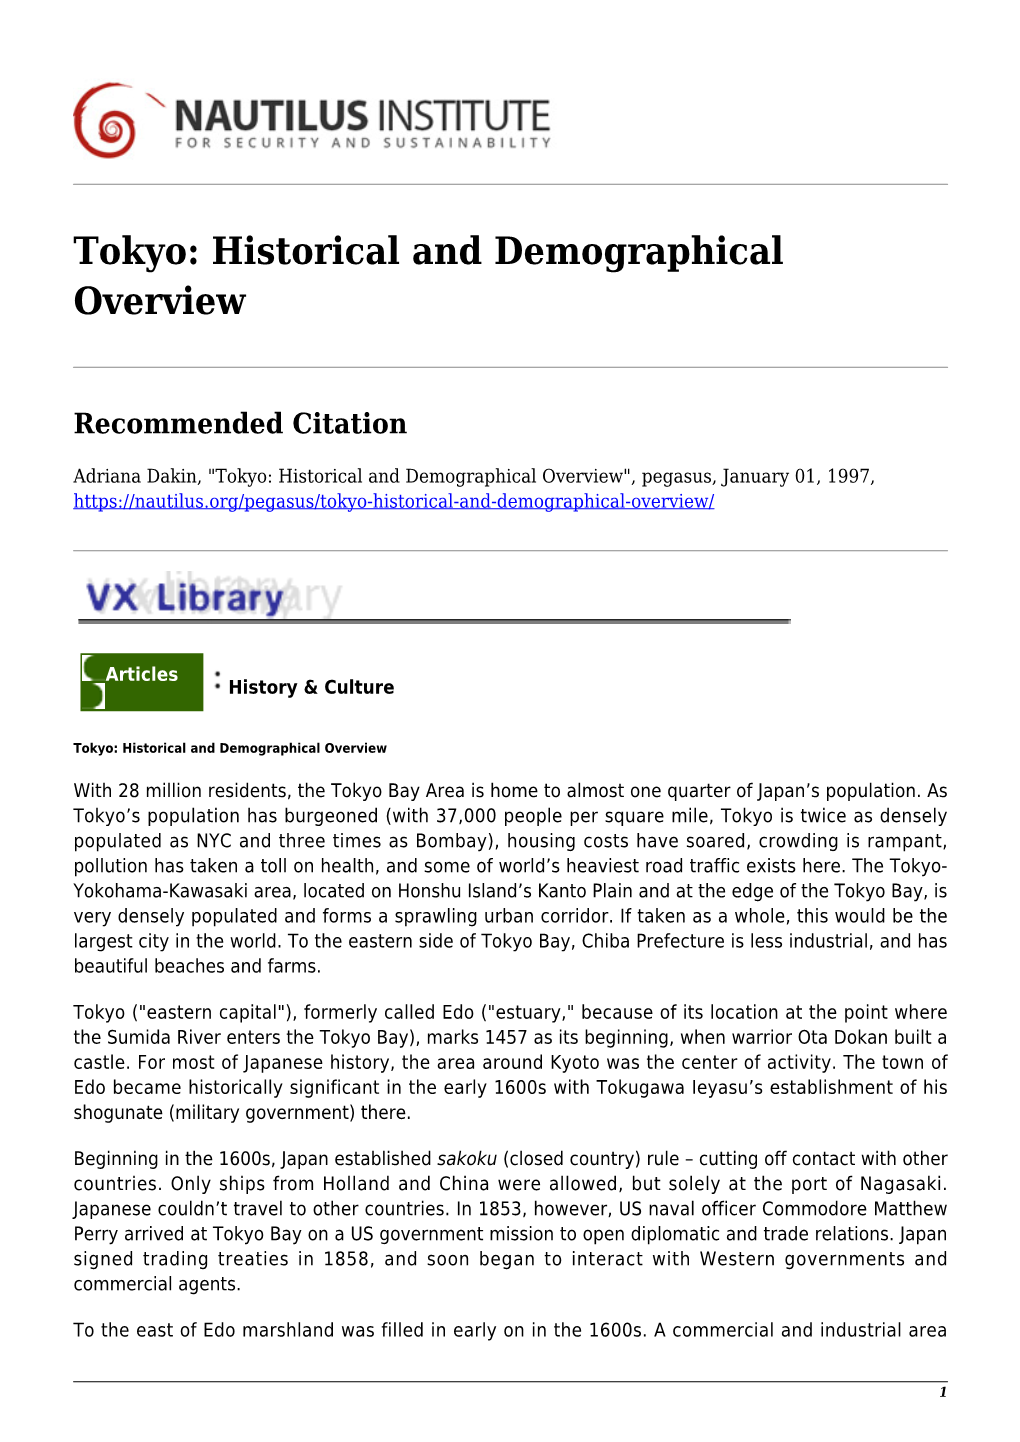 Tokyo: Historical and Demographical Overview